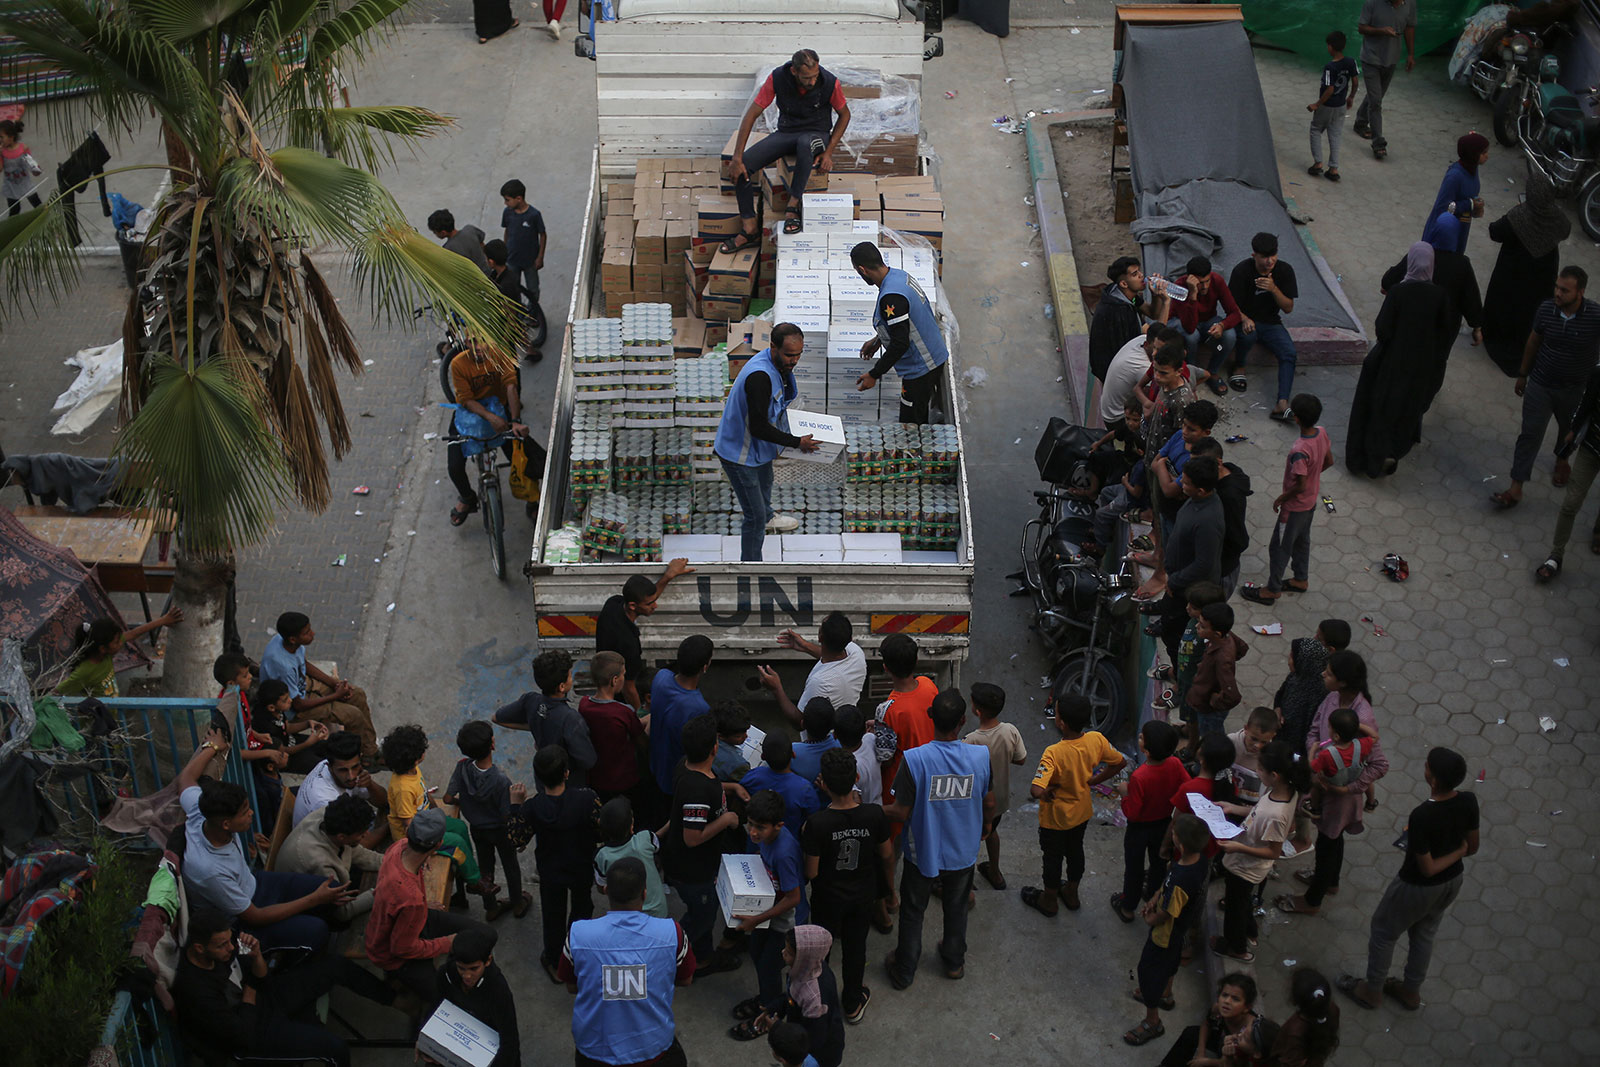 Employees with UNRWA distribute aid to displaced Palestinians at a school in Khan Younis, Gaza, on October 16.